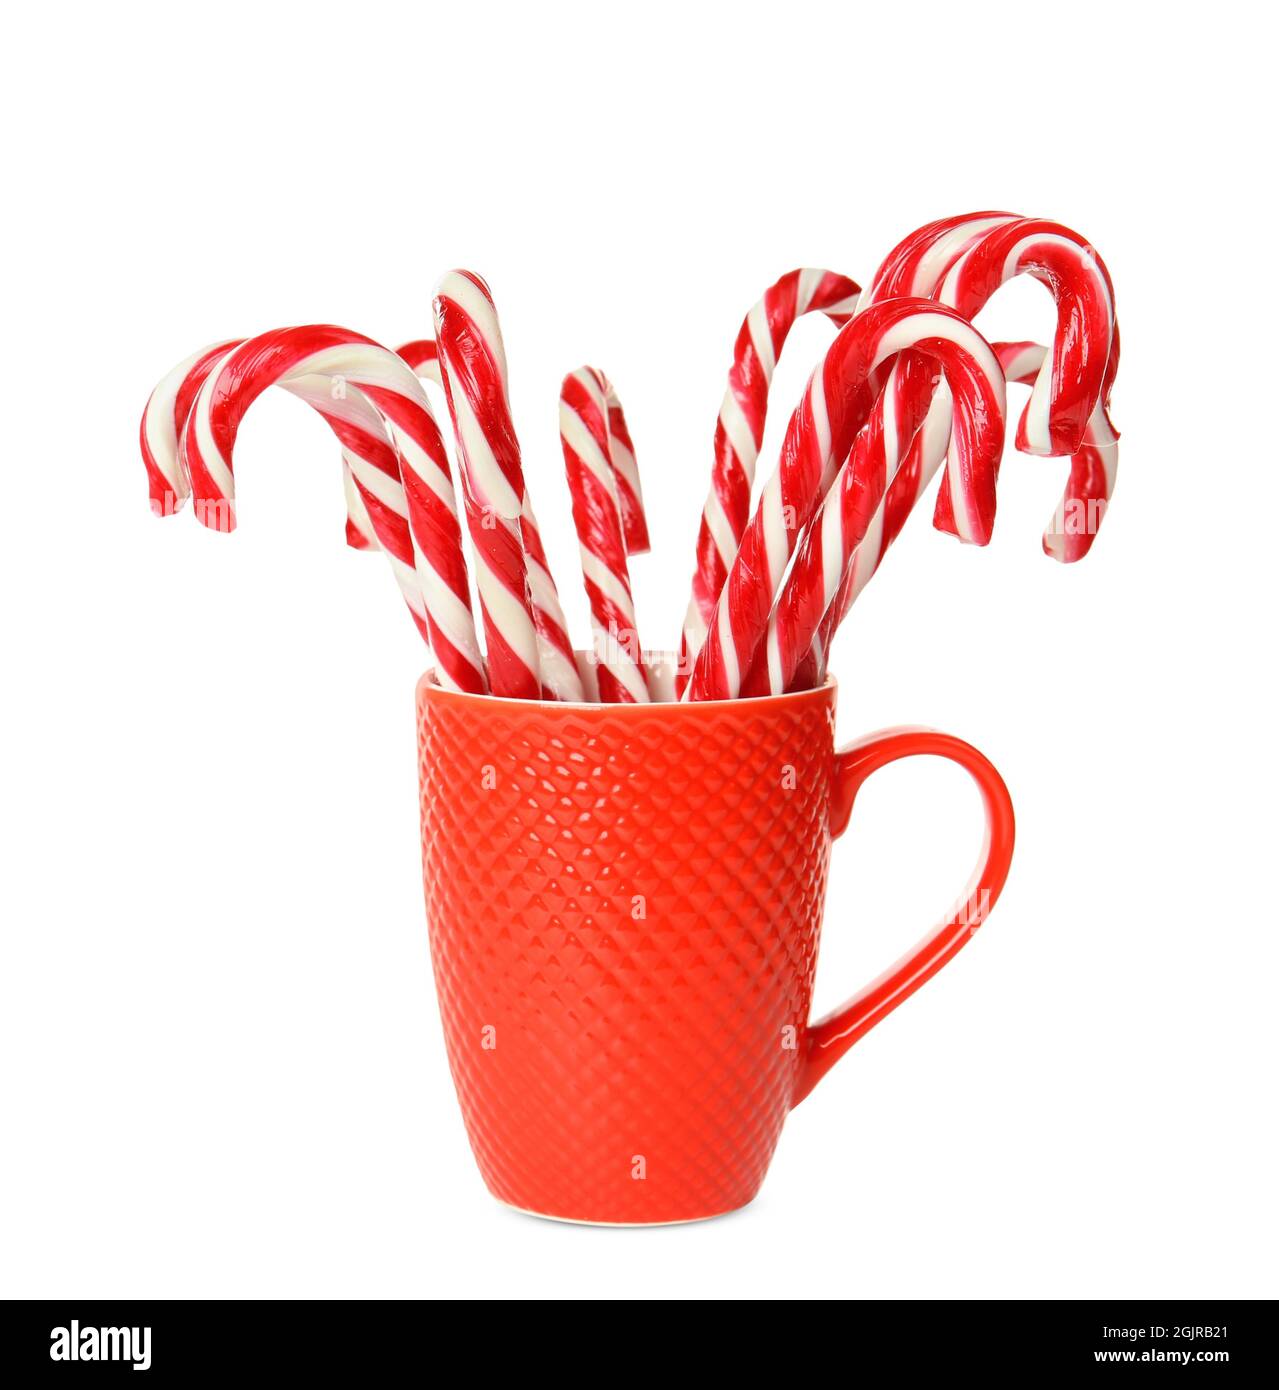 https://c8.alamy.com/comp/2GJRB21/christmas-candy-canes-in-cup-on-white-background-2GJRB21.jpg